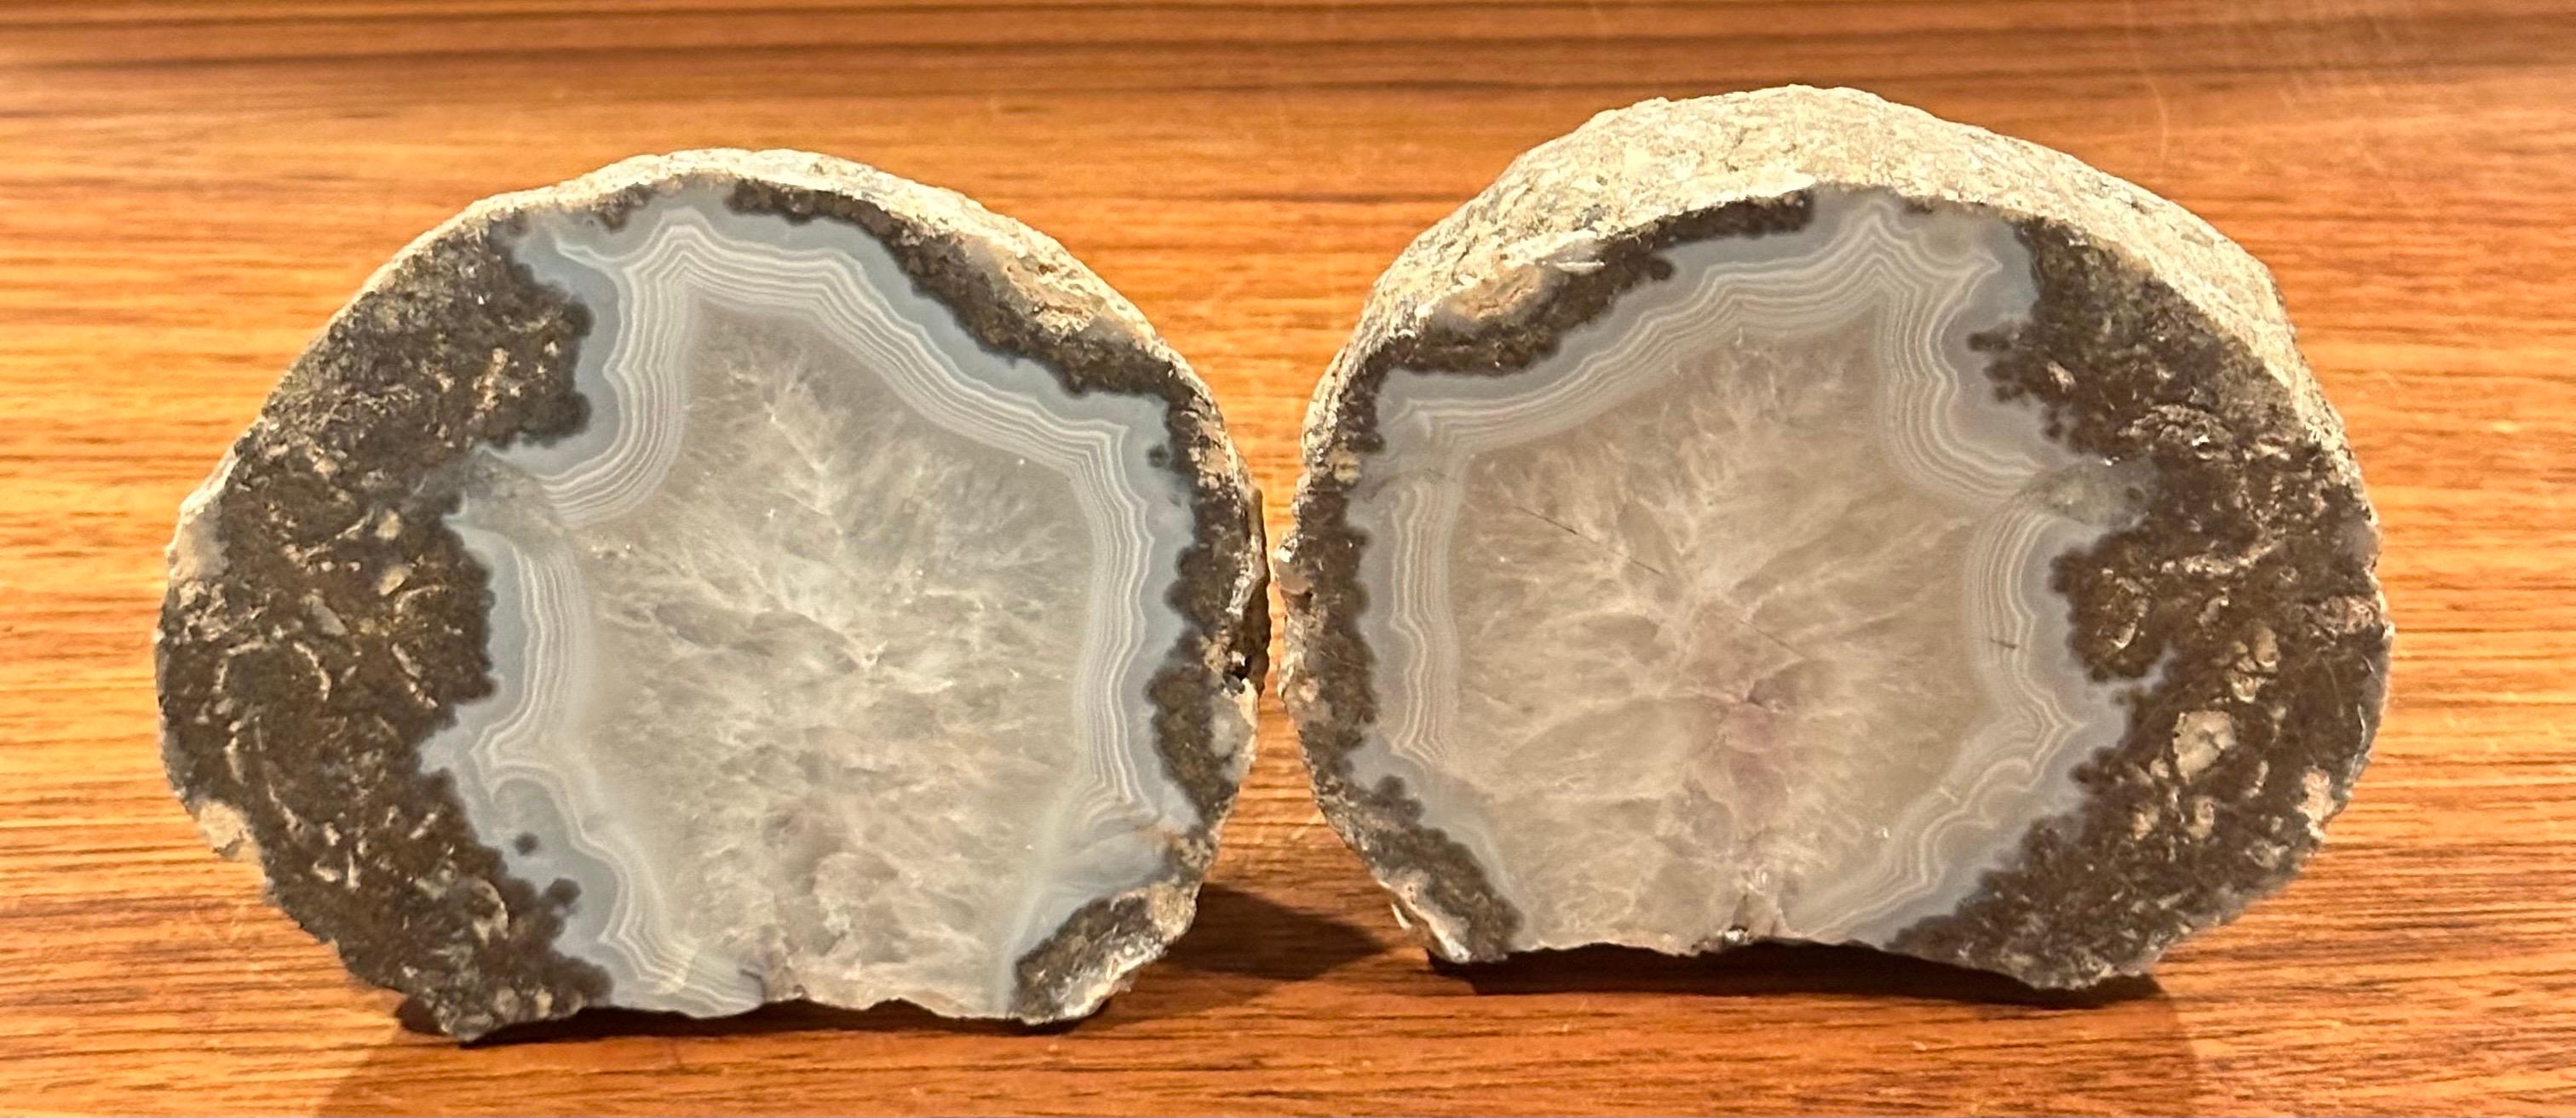 Pair of vintage round geode bookends, circa old!   The set is in very good vintage condition with no chips or cracks and measures 4.5